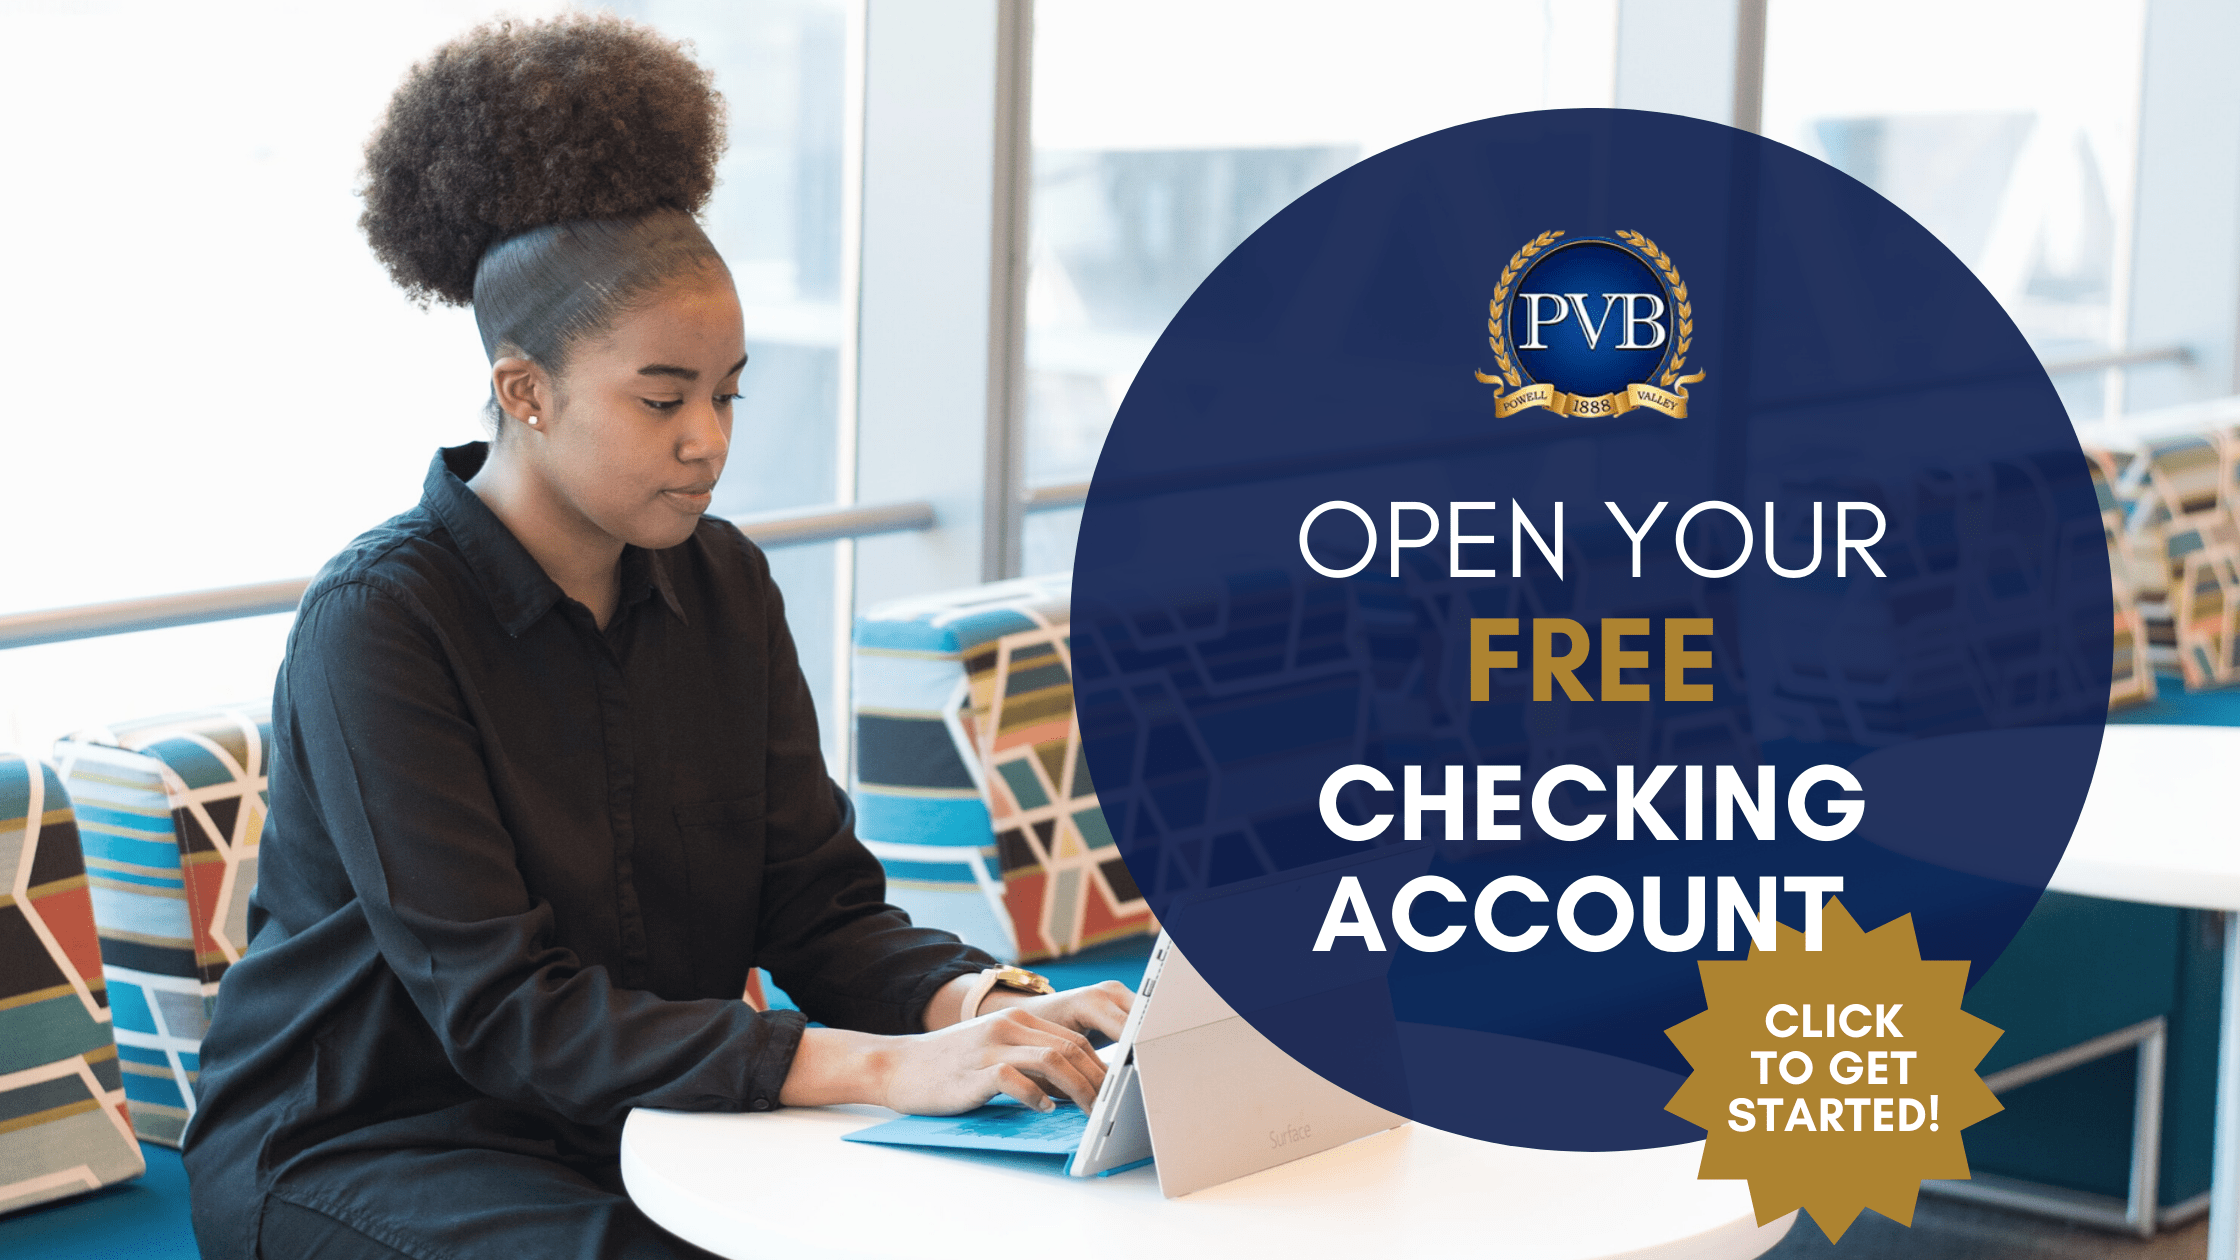 Open Your Free Checking Account